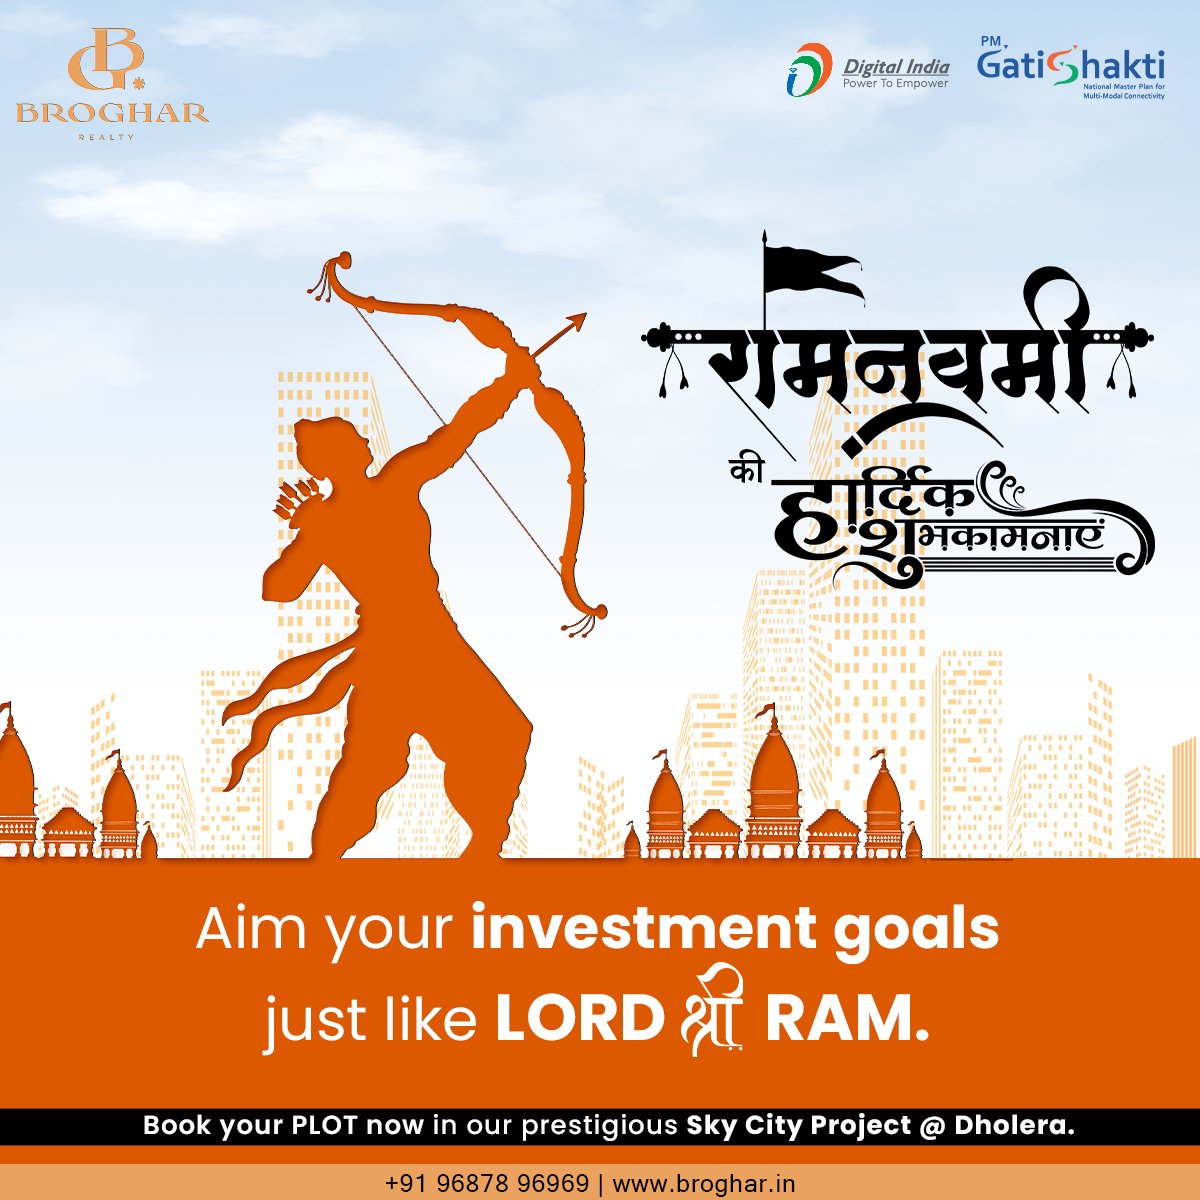 If you are focused on your investment returns,
Meeting with Broghar will be your only target...

Get the best ROI with Broghar Realty...
Jay Shree Ram...🚩🚩🚩

#broghar #brogharrealty #dholera #investment #dholerasir #invest #DholeraSmartCity #returns #money #affordable #plots